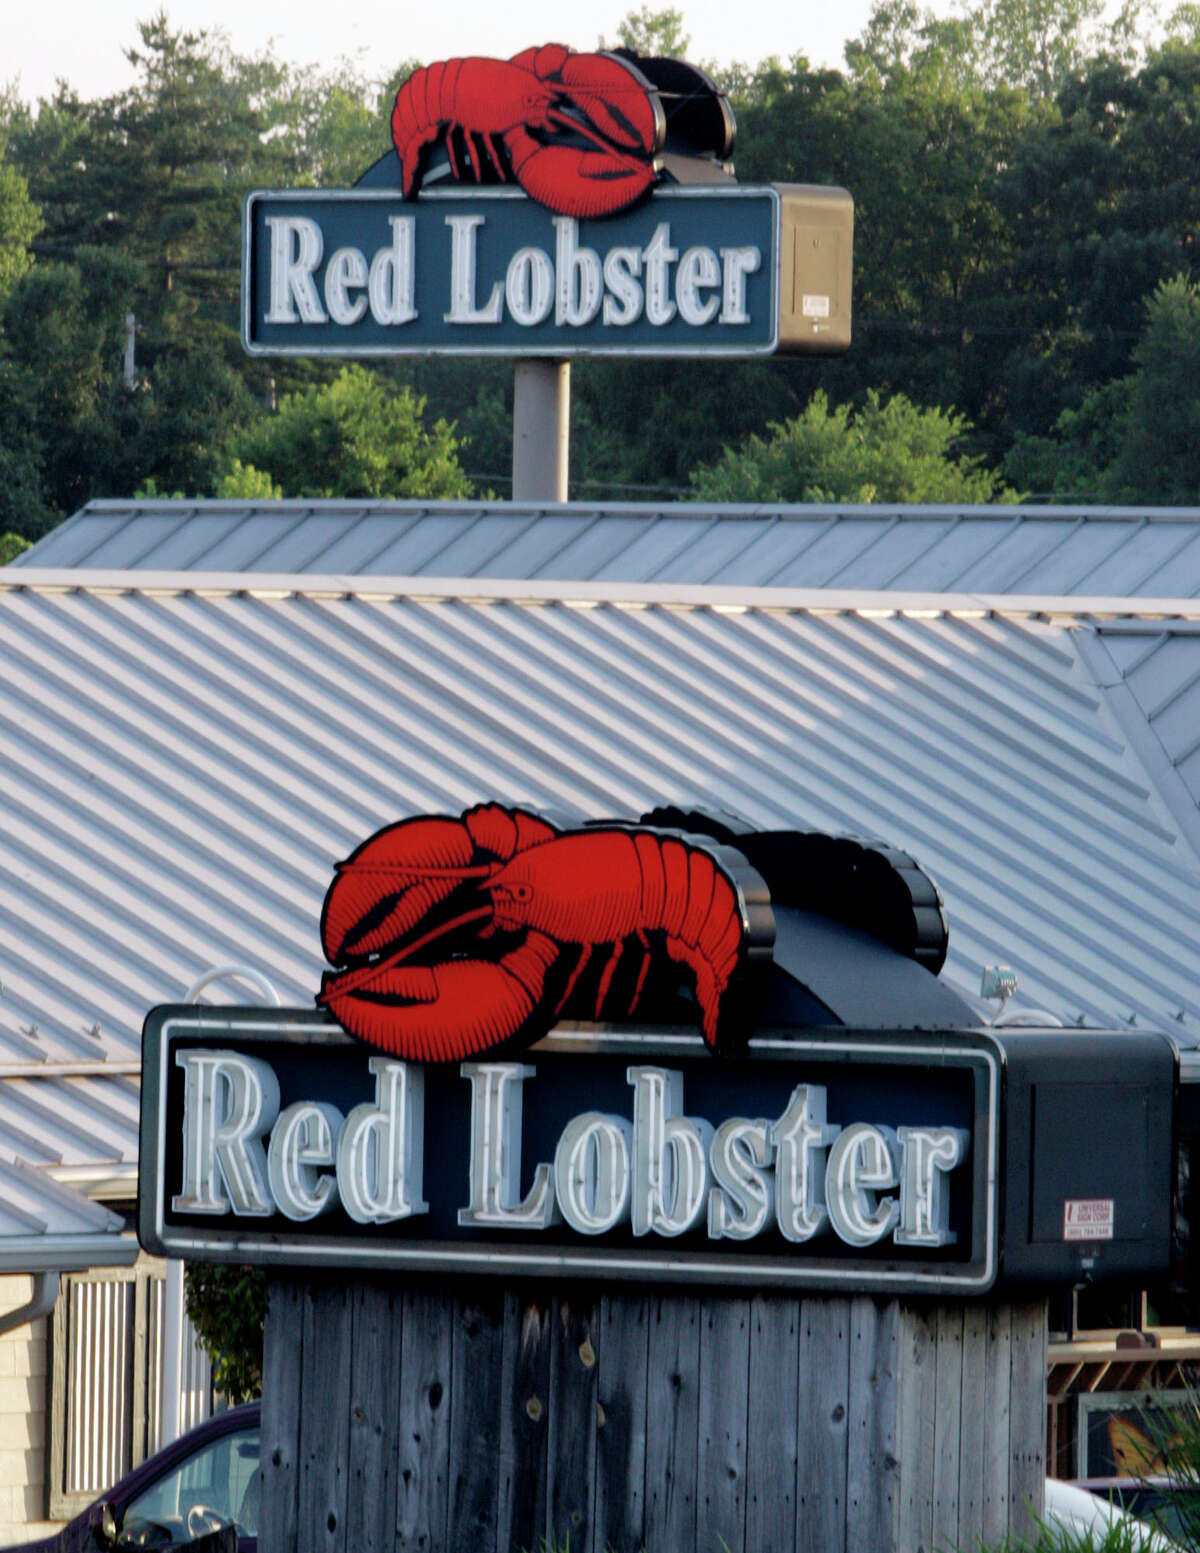 A Red Lobster restaurant in Webster is accused of over-serving an elderly woman who fell and broke her hip, according to a lawsuit filed in Harris County on Monday, Sept. 18, 2017. See other Houston-area bars that were cited for over-serving this past year.